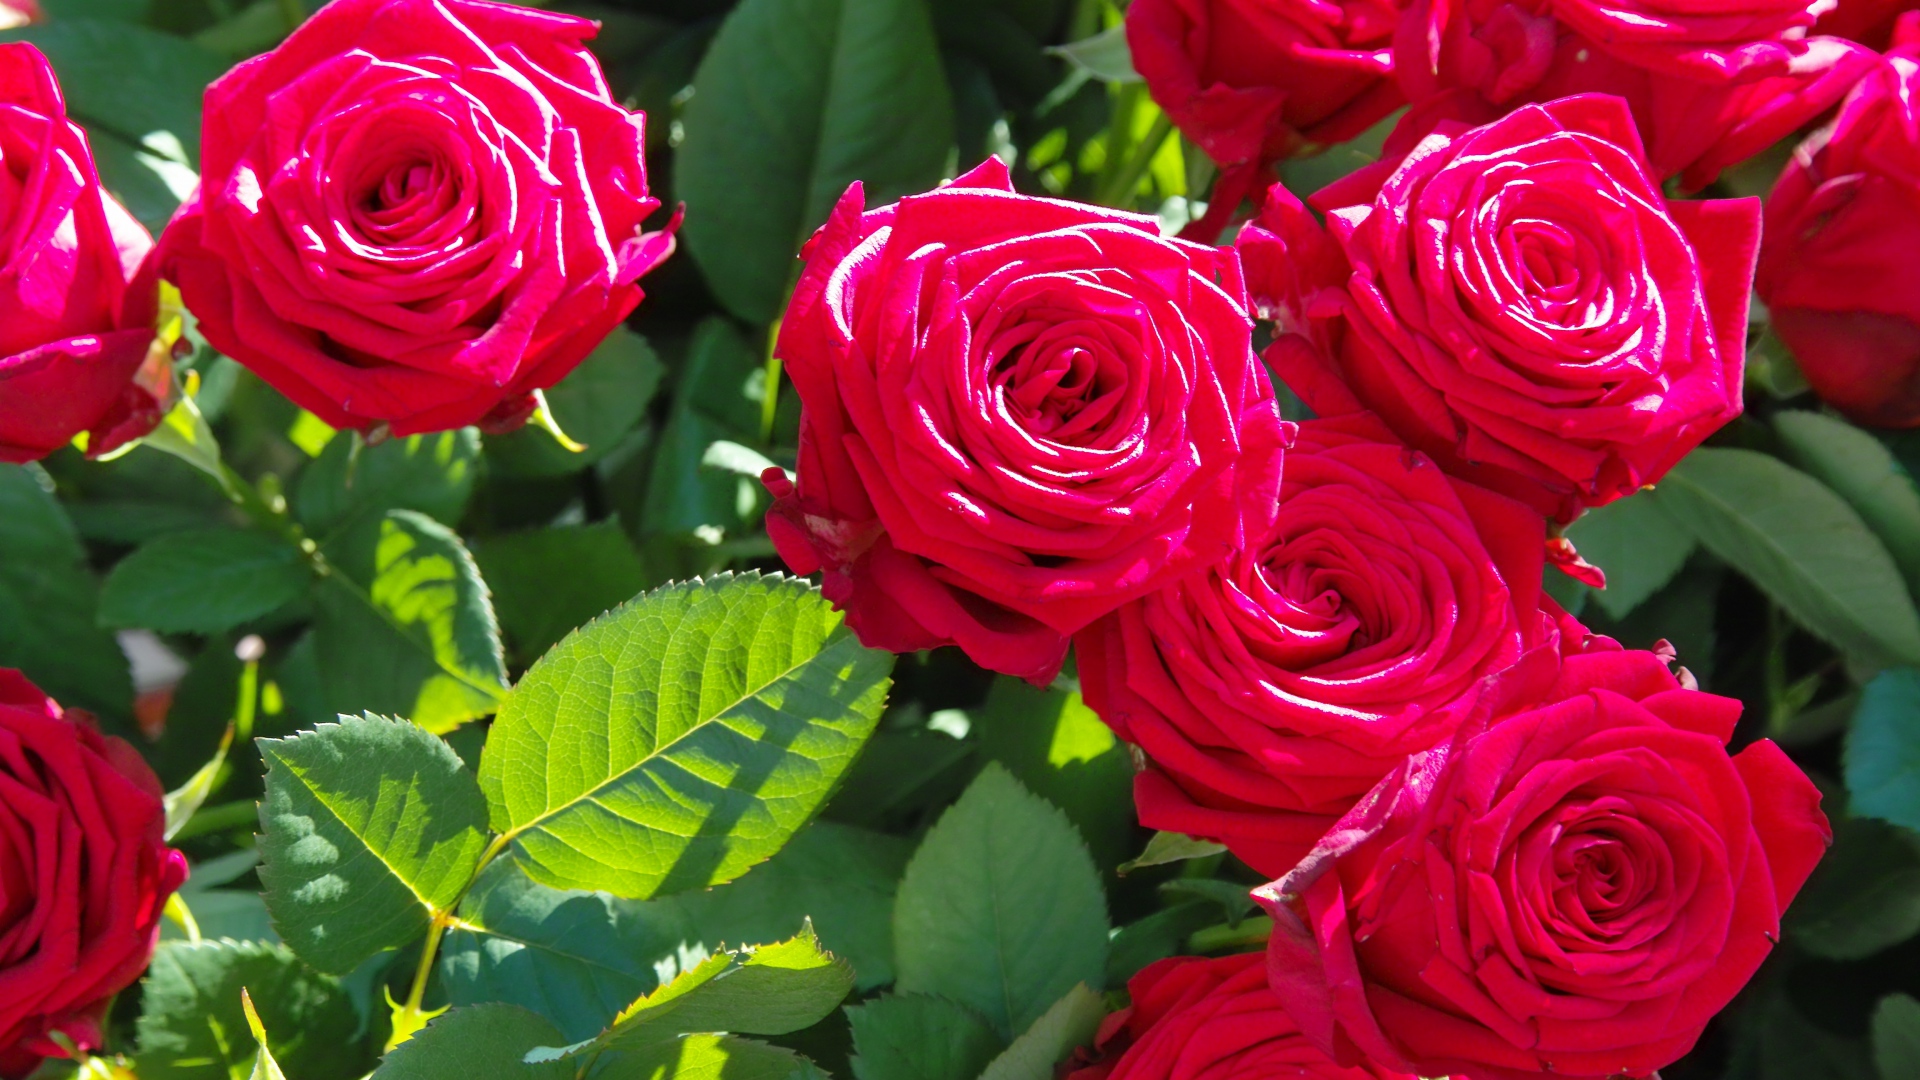 rose_flowers_buds_petals_branches_106614_1920x1080